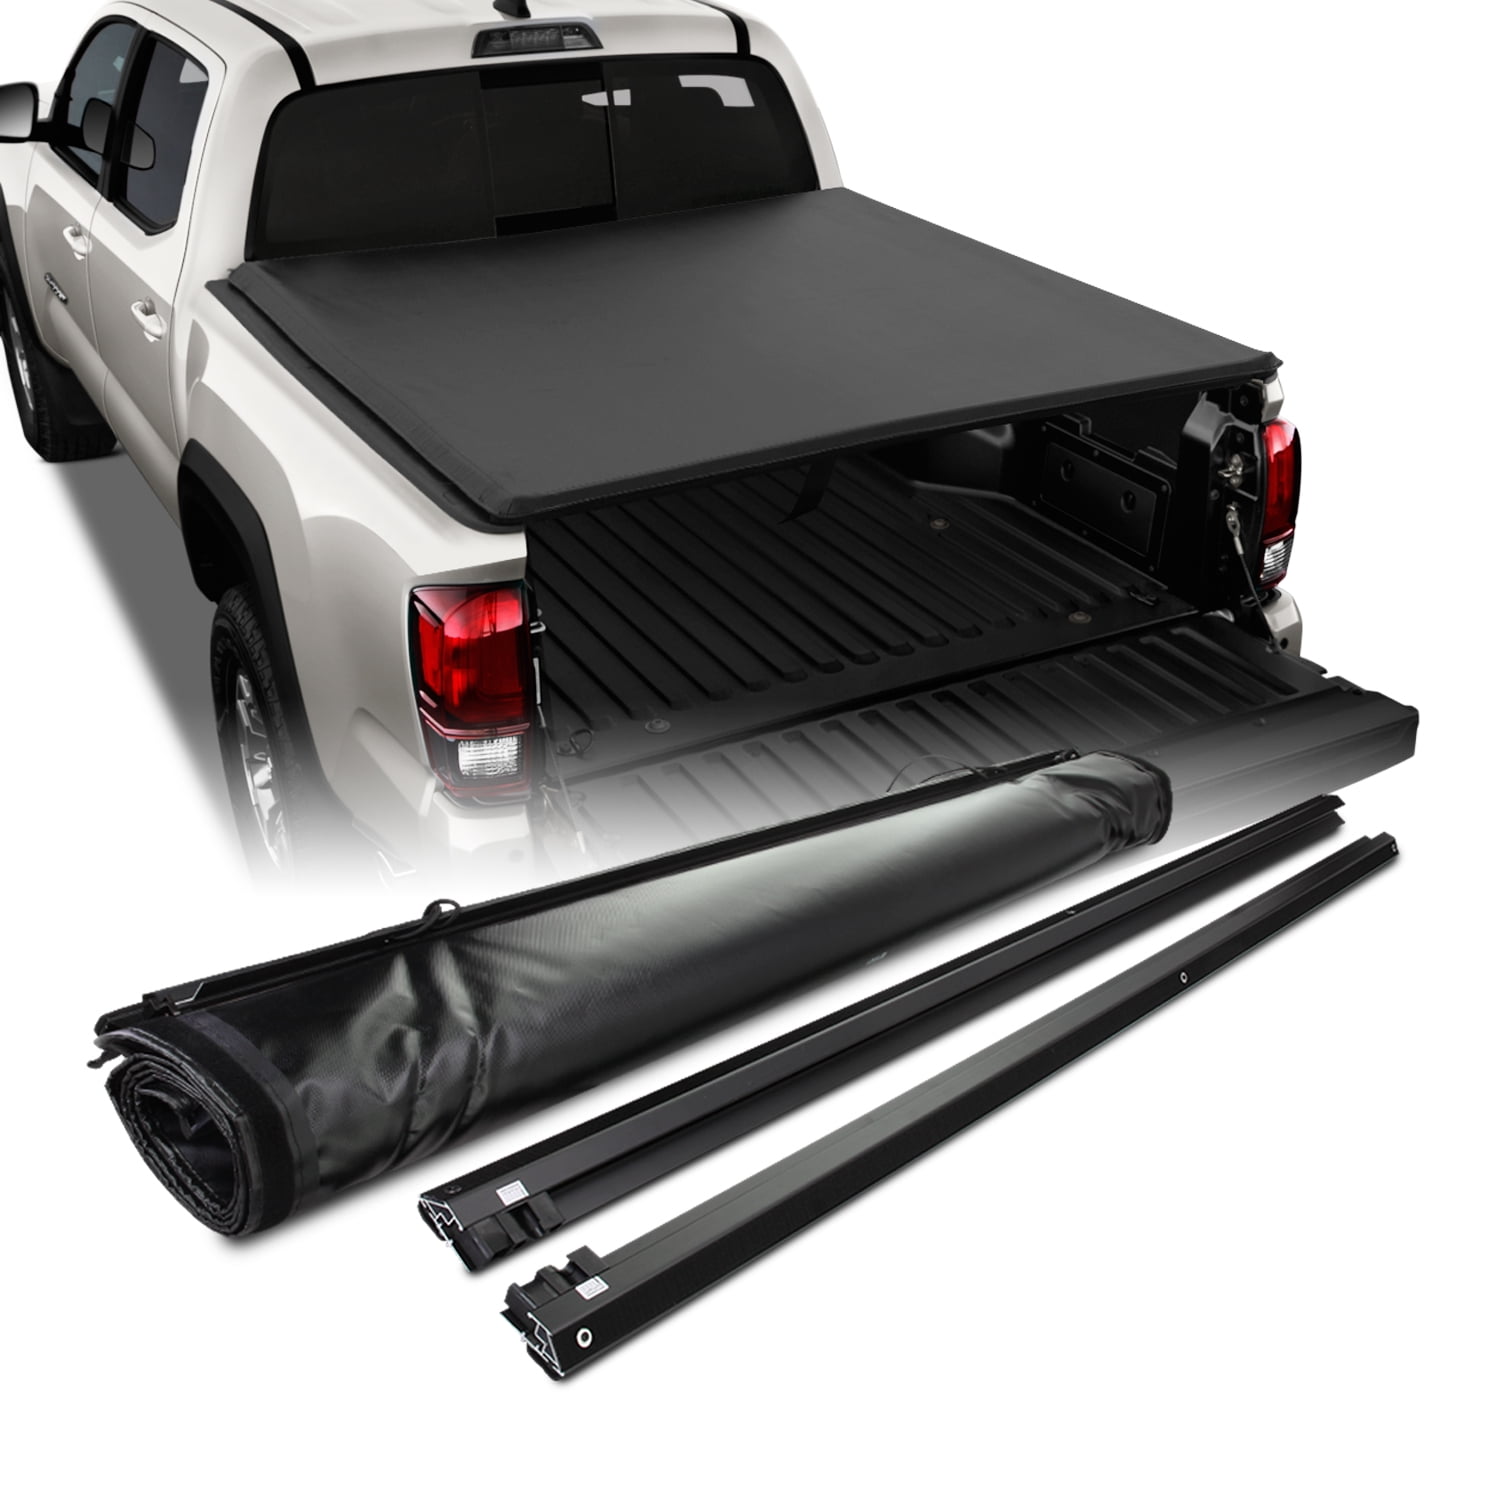 Tonneau Cover For 20162018 Toyota Crew/Extended Cab 5Ft 60" Soft Roll Up